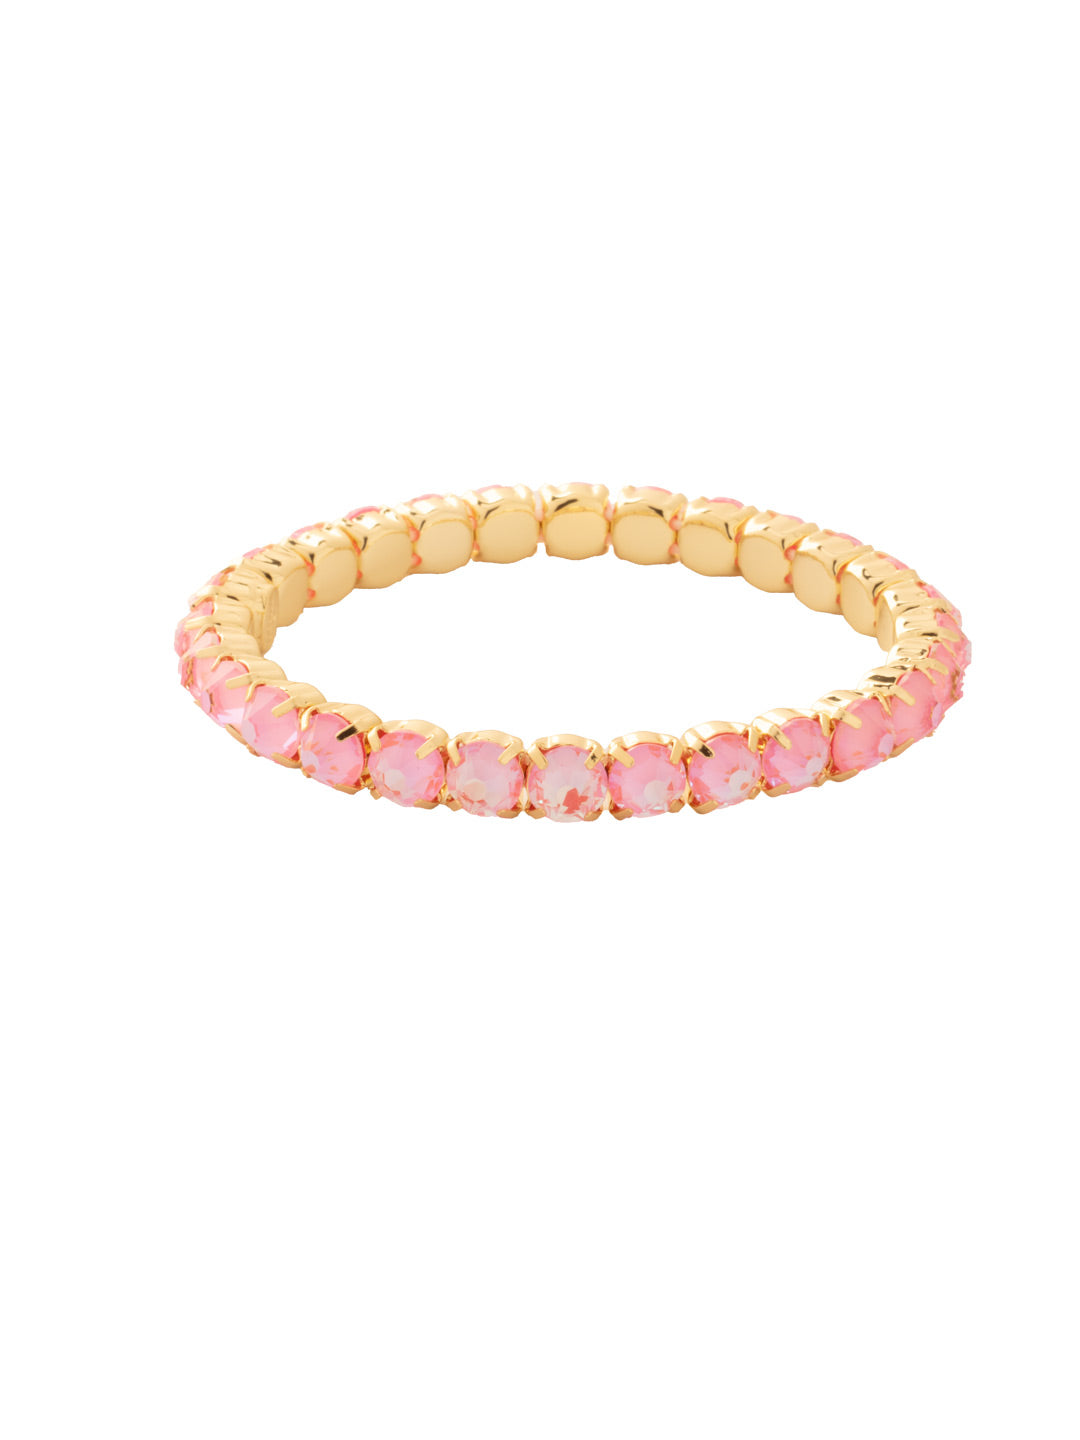 Mini Sienna Stretch Bracelet - BFD52BGLRD - <p>The Mini Sienna Stretch Bracelet is a mini take on a bestselling style! The Mini Sienna Stretch Bracelet features a line of small round crystals on a sturdy jewelers' filament, stretching to fit most wrists comfortably, without the hassle of a clasp! From Sorrelli's Light Rose Delite collection in our Bright Gold-tone finish.</p>